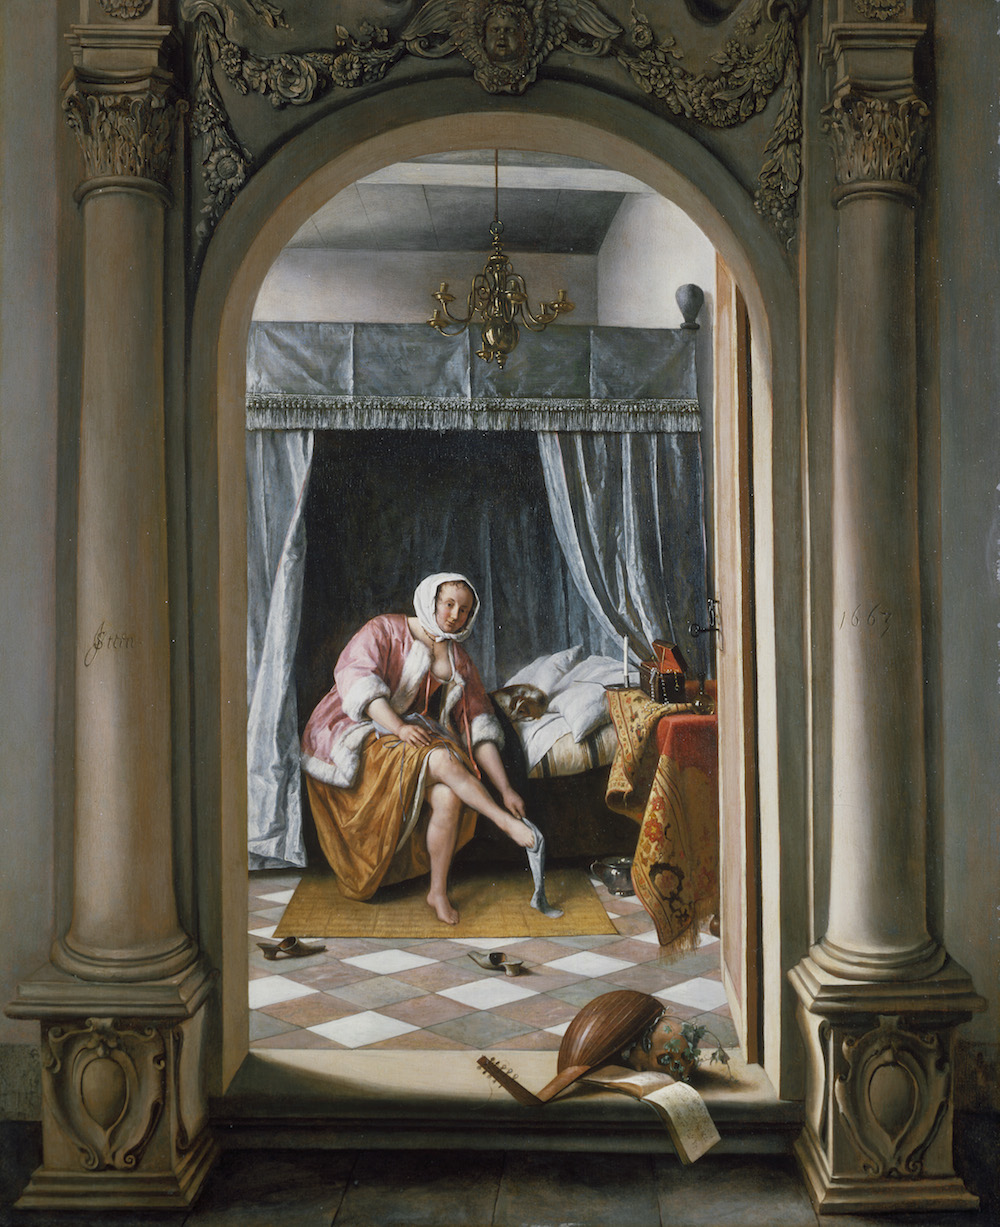 Woman at her Toilet, by Jan Steen. Royal Collection Trust/© Her Majesty Queen Elizabeth II 2016